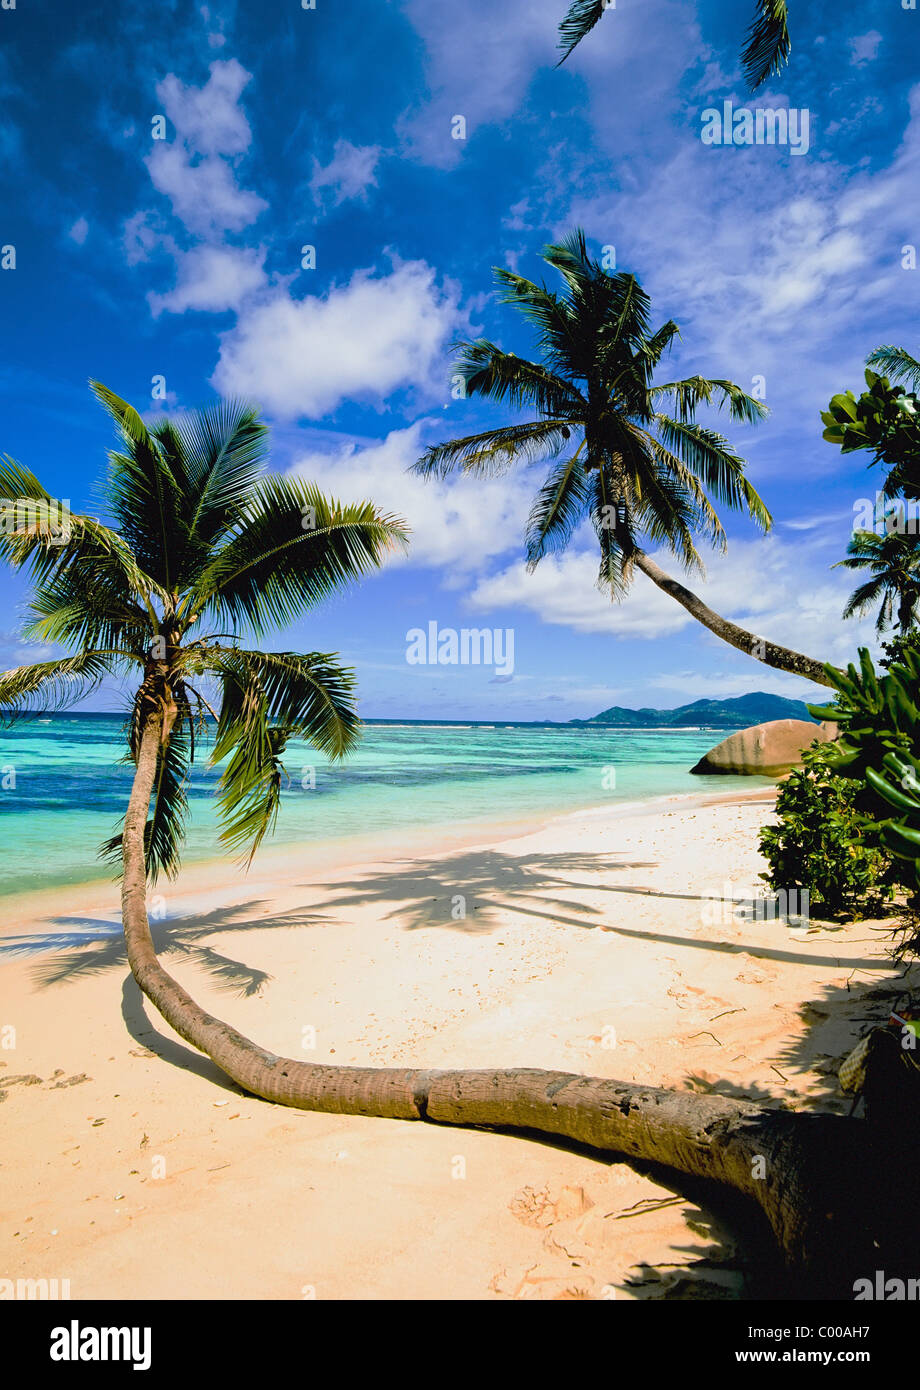 Leaning Palm Trees On Beach Stock Photo - Alamy